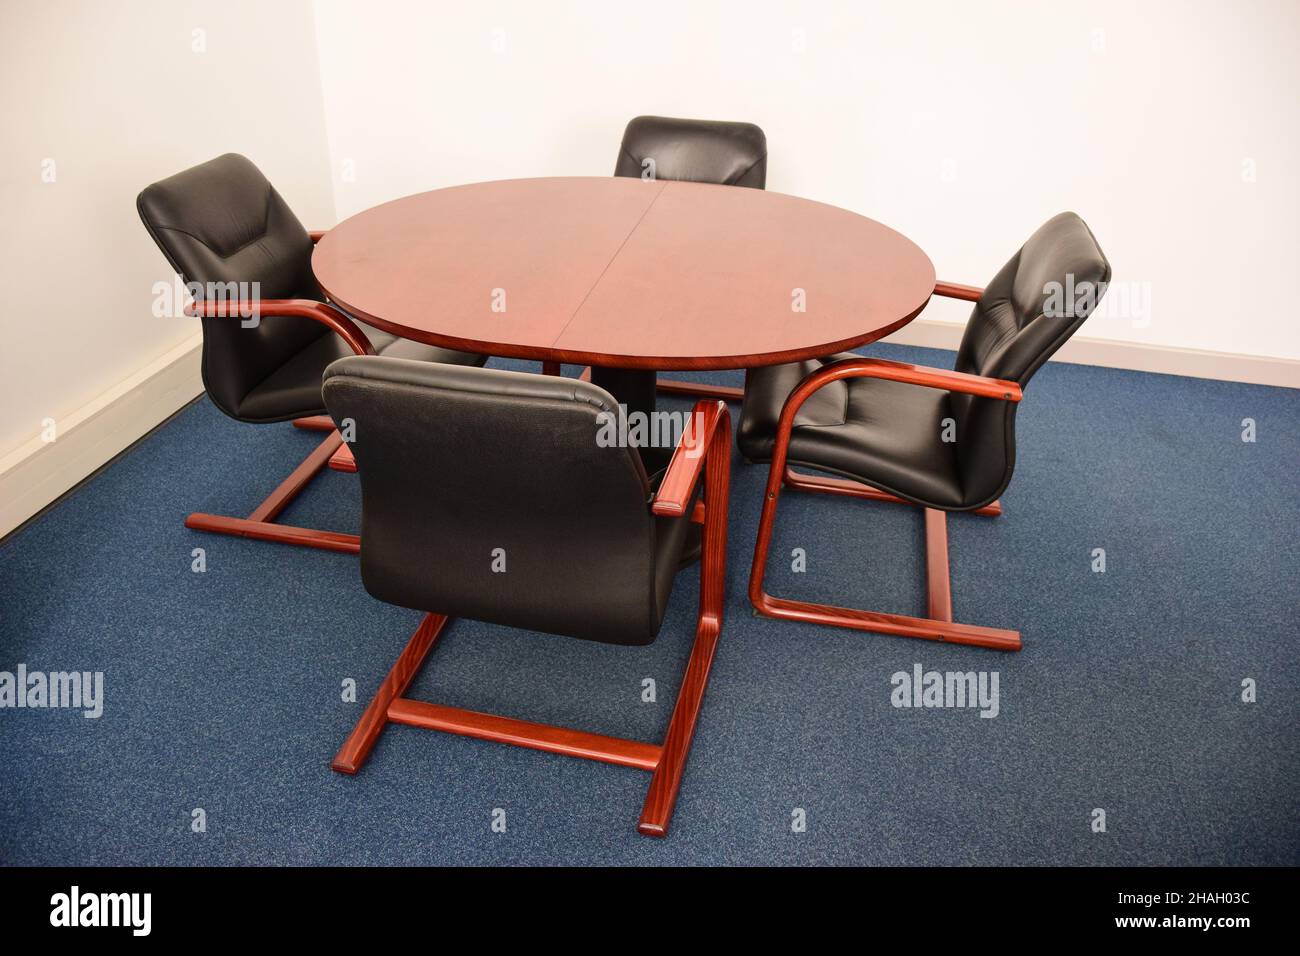 Four empty leather decorative office chairs sit around a brown round table. Stock Photo